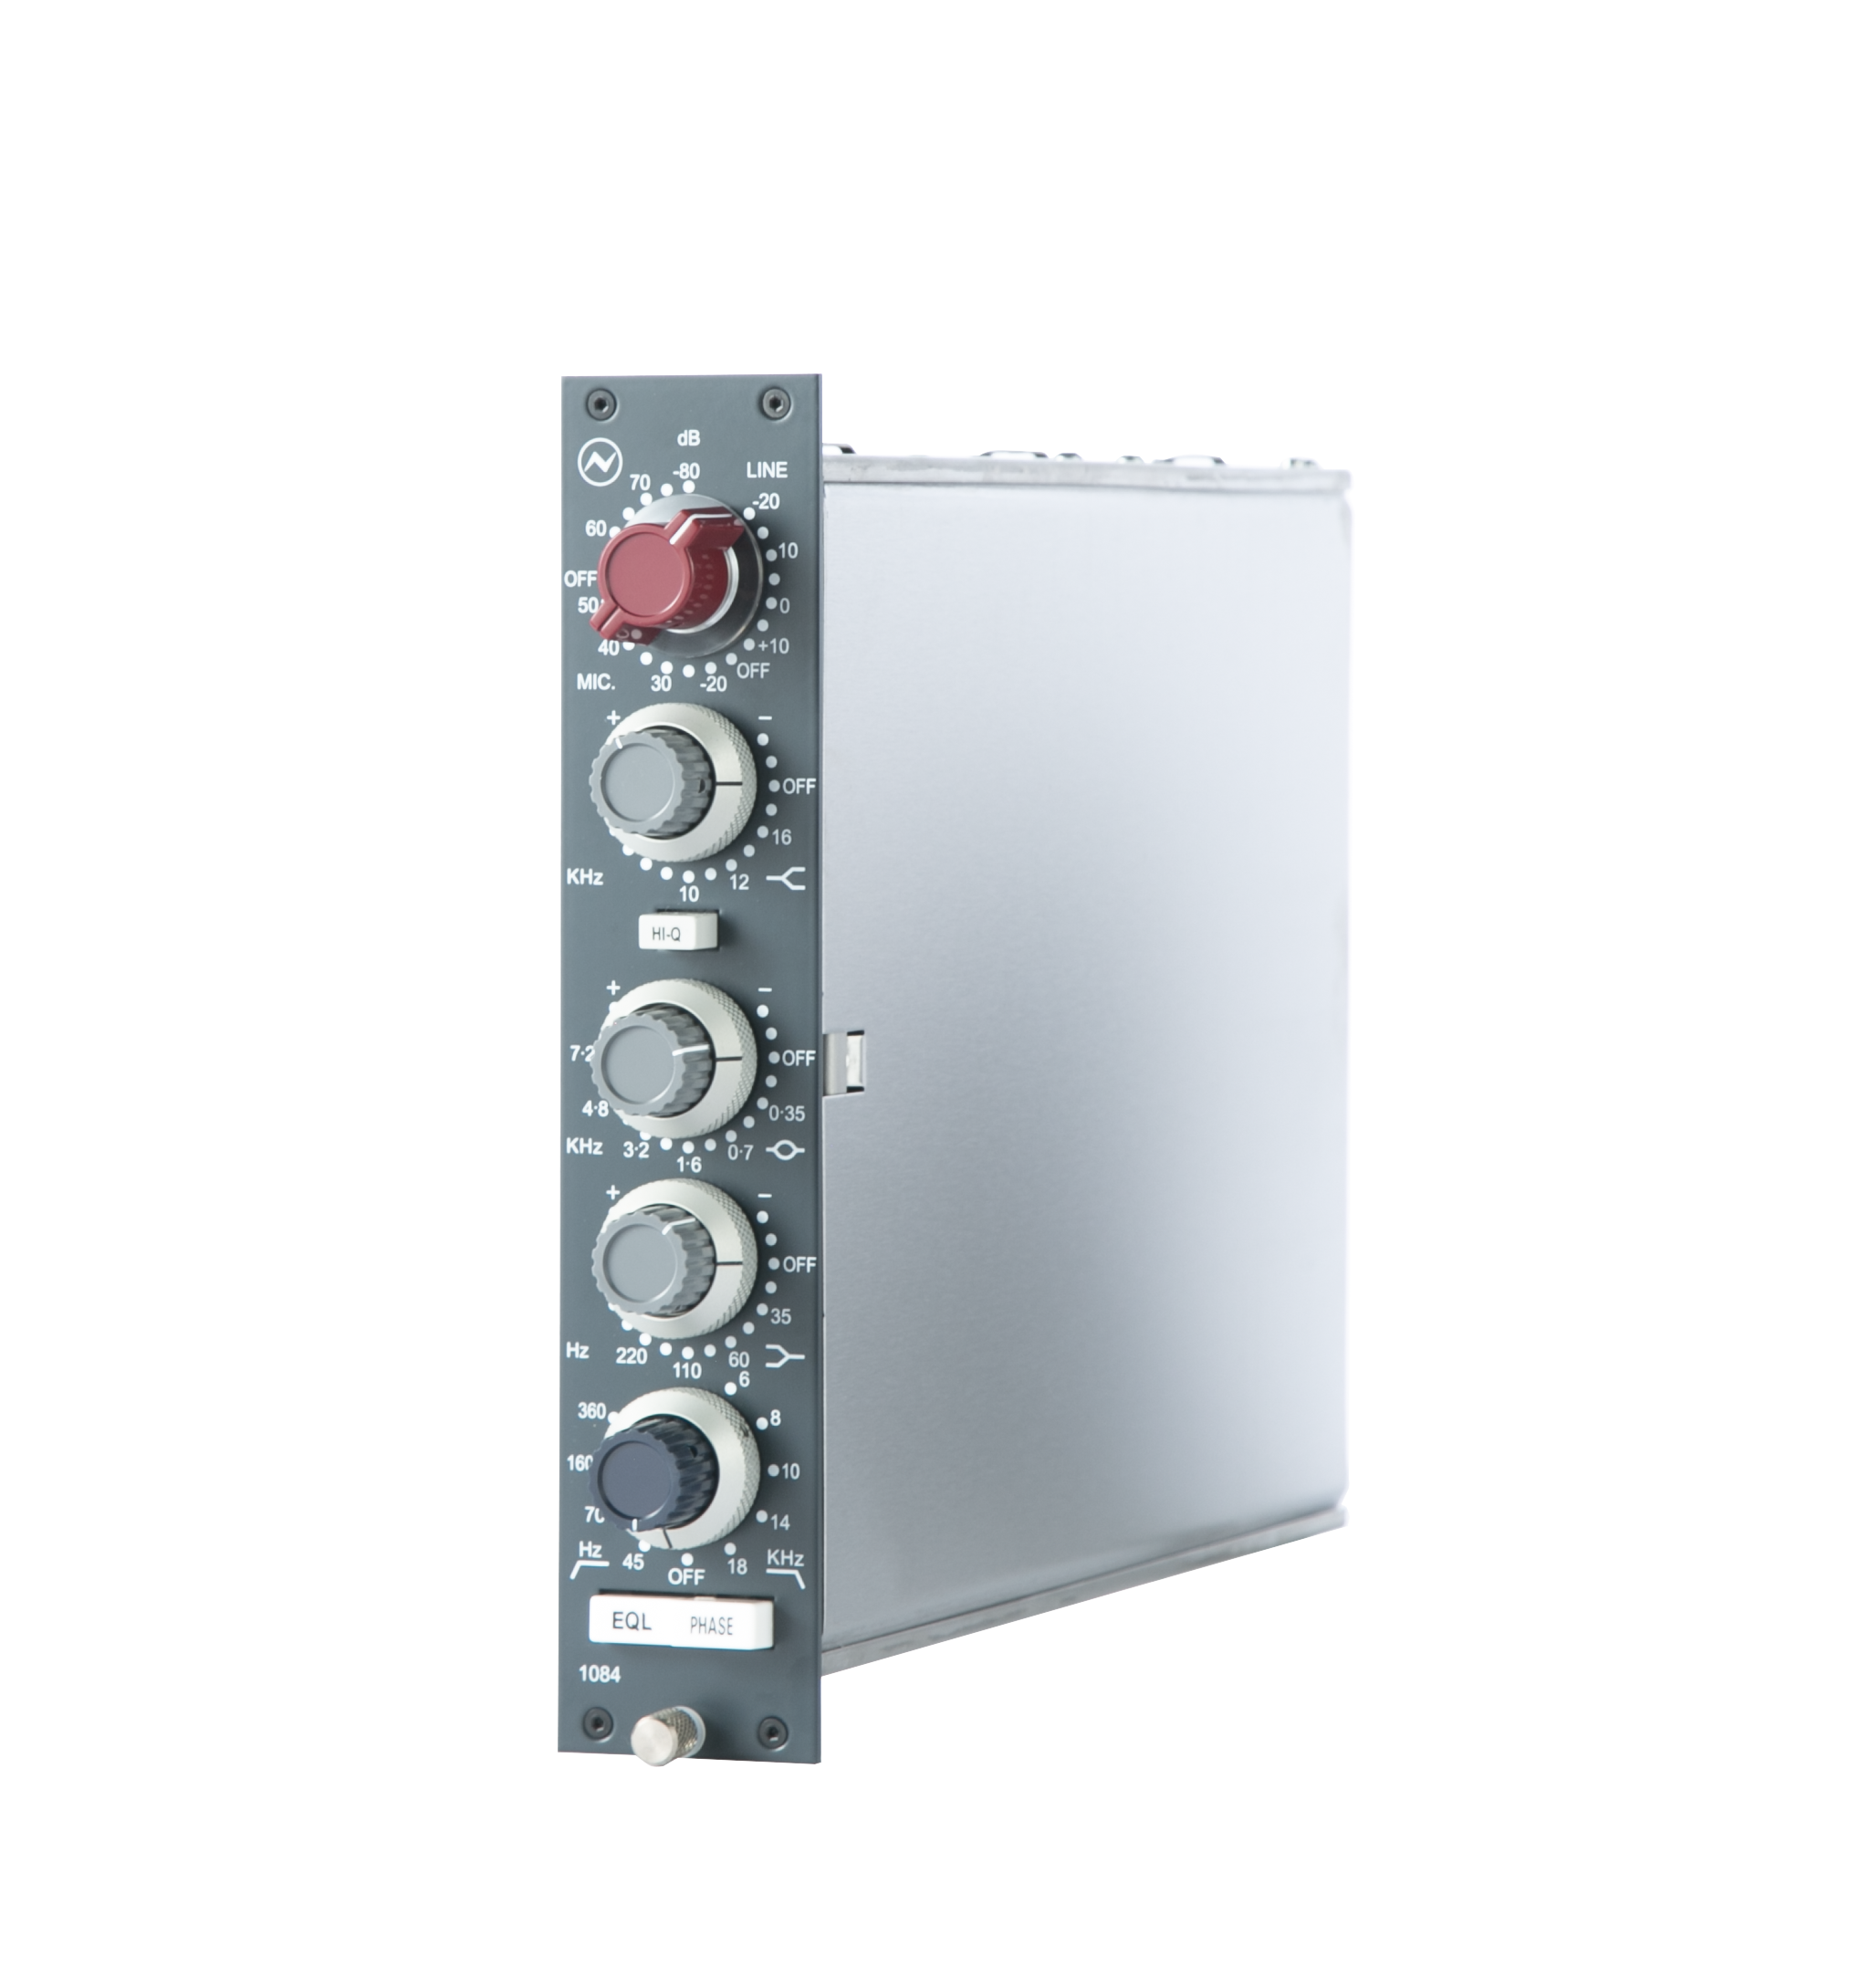 AMS Neve 1084 Microphone Preamp and Equalizer Professional Audio Design,  Inc Professional Audio Design, Inc